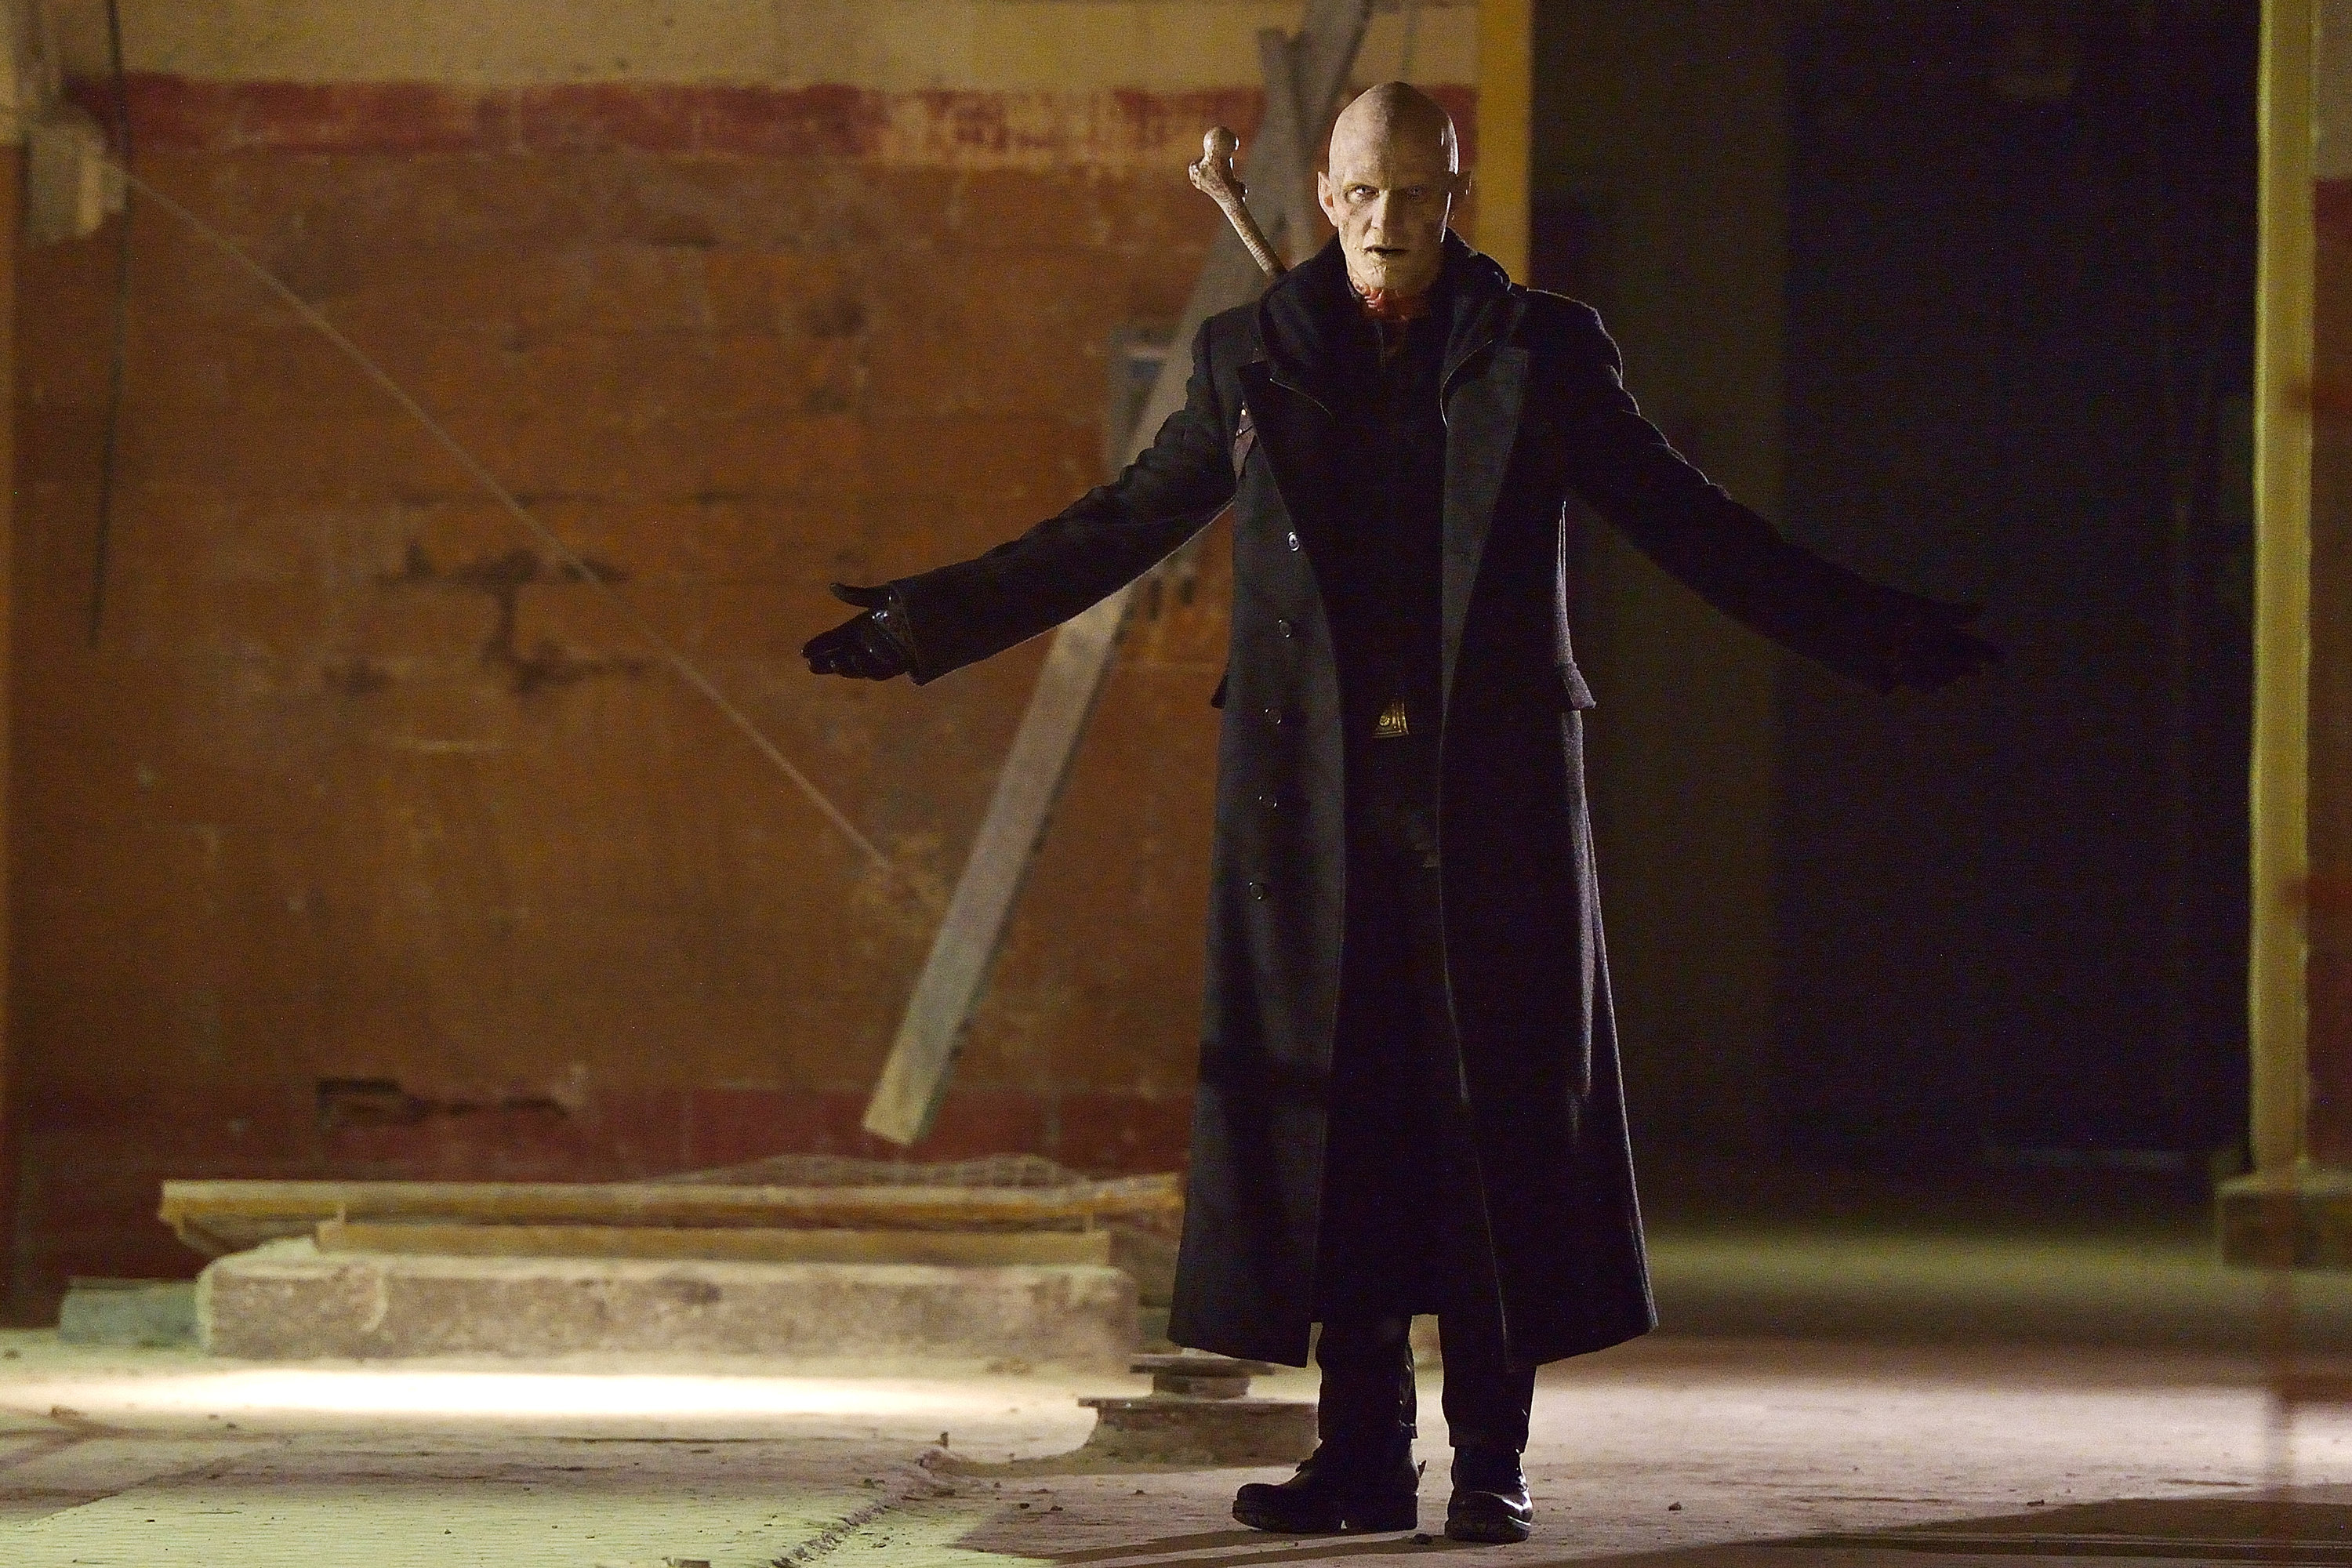 The Strain Wallpapers